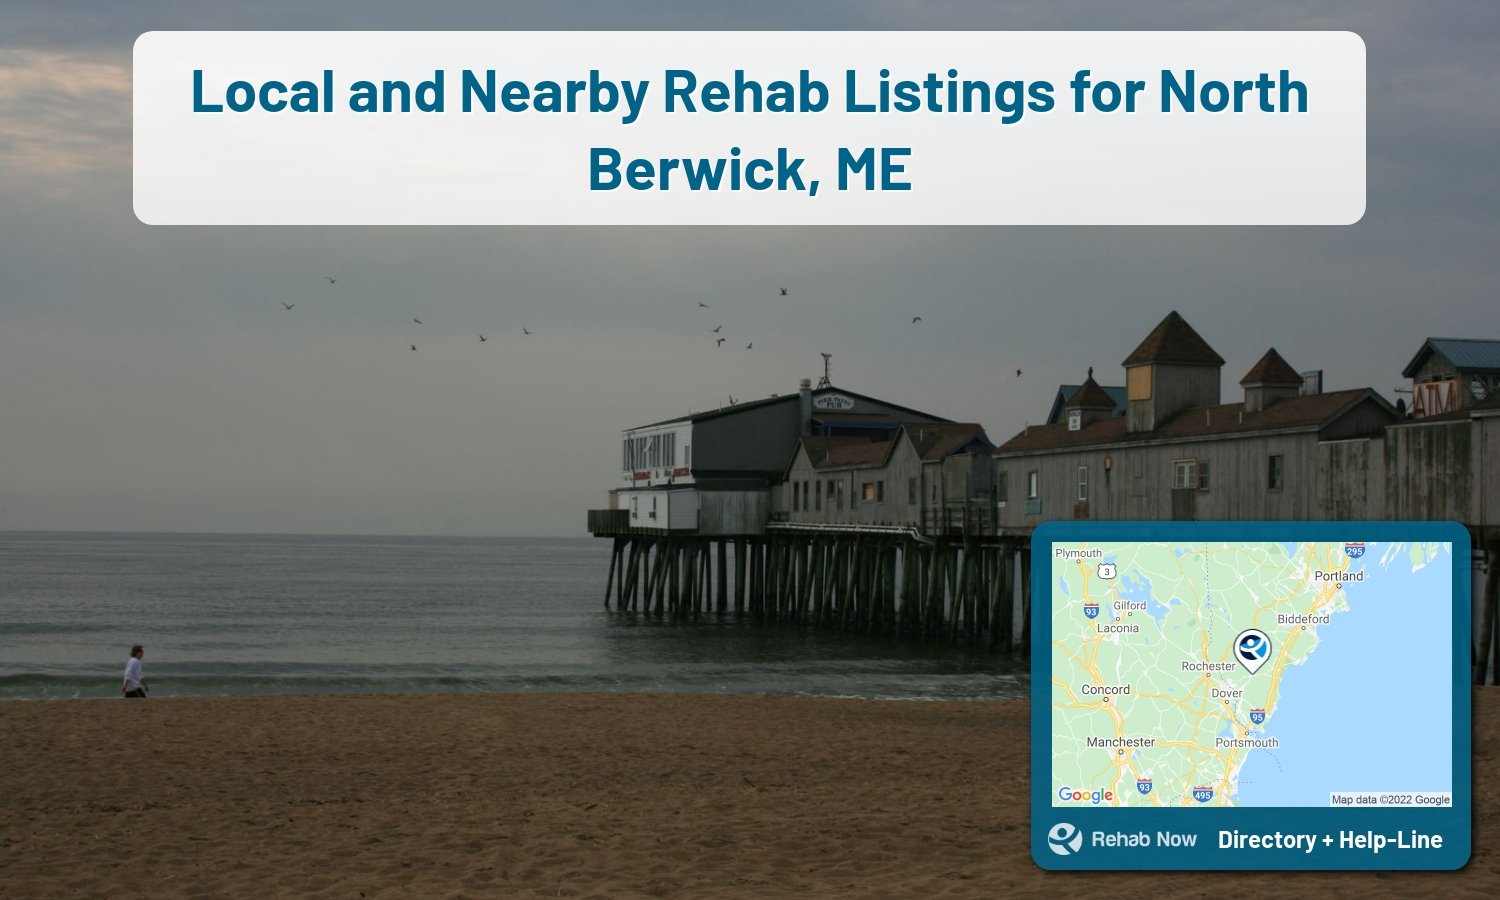 List of alcohol and drug treatment centers near you in North Berwick, Maine. Research certifications, programs, methods, pricing, and more.